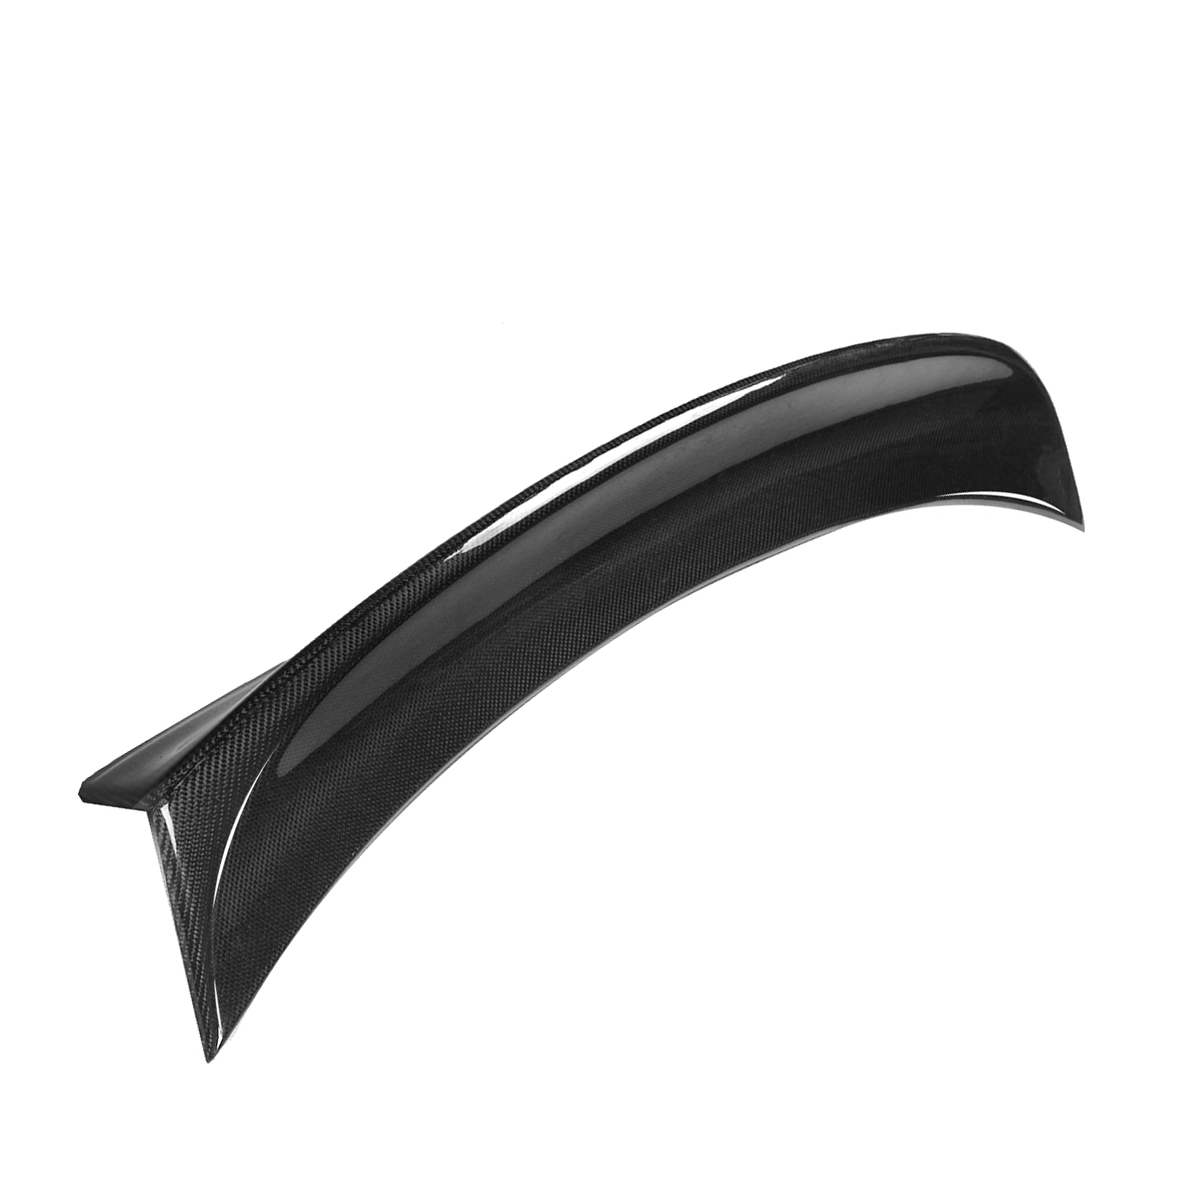 CSL-Style-Carbon-Fiber-Trunk-Lid-Car-Spoiler-Wing-For-BMW-2001-06-E46-3-SERIES--M3-COUPE-1514796